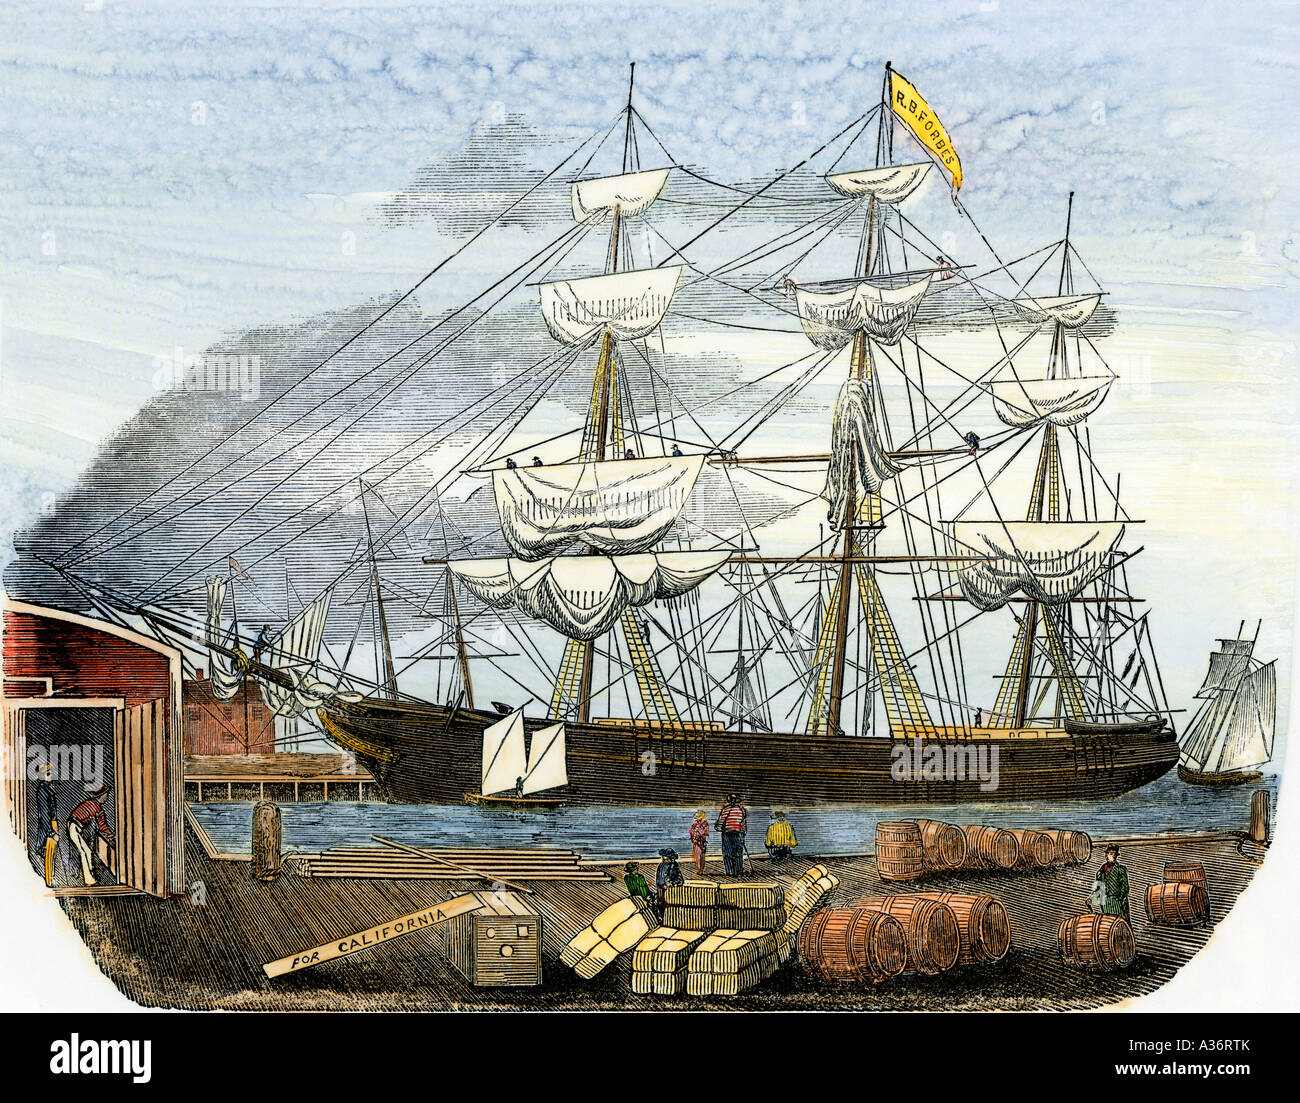 Clipper ship R B Forbes of Boston taking on cargo for voyage to California 1851. Hand-colored woodcut Stock Photo